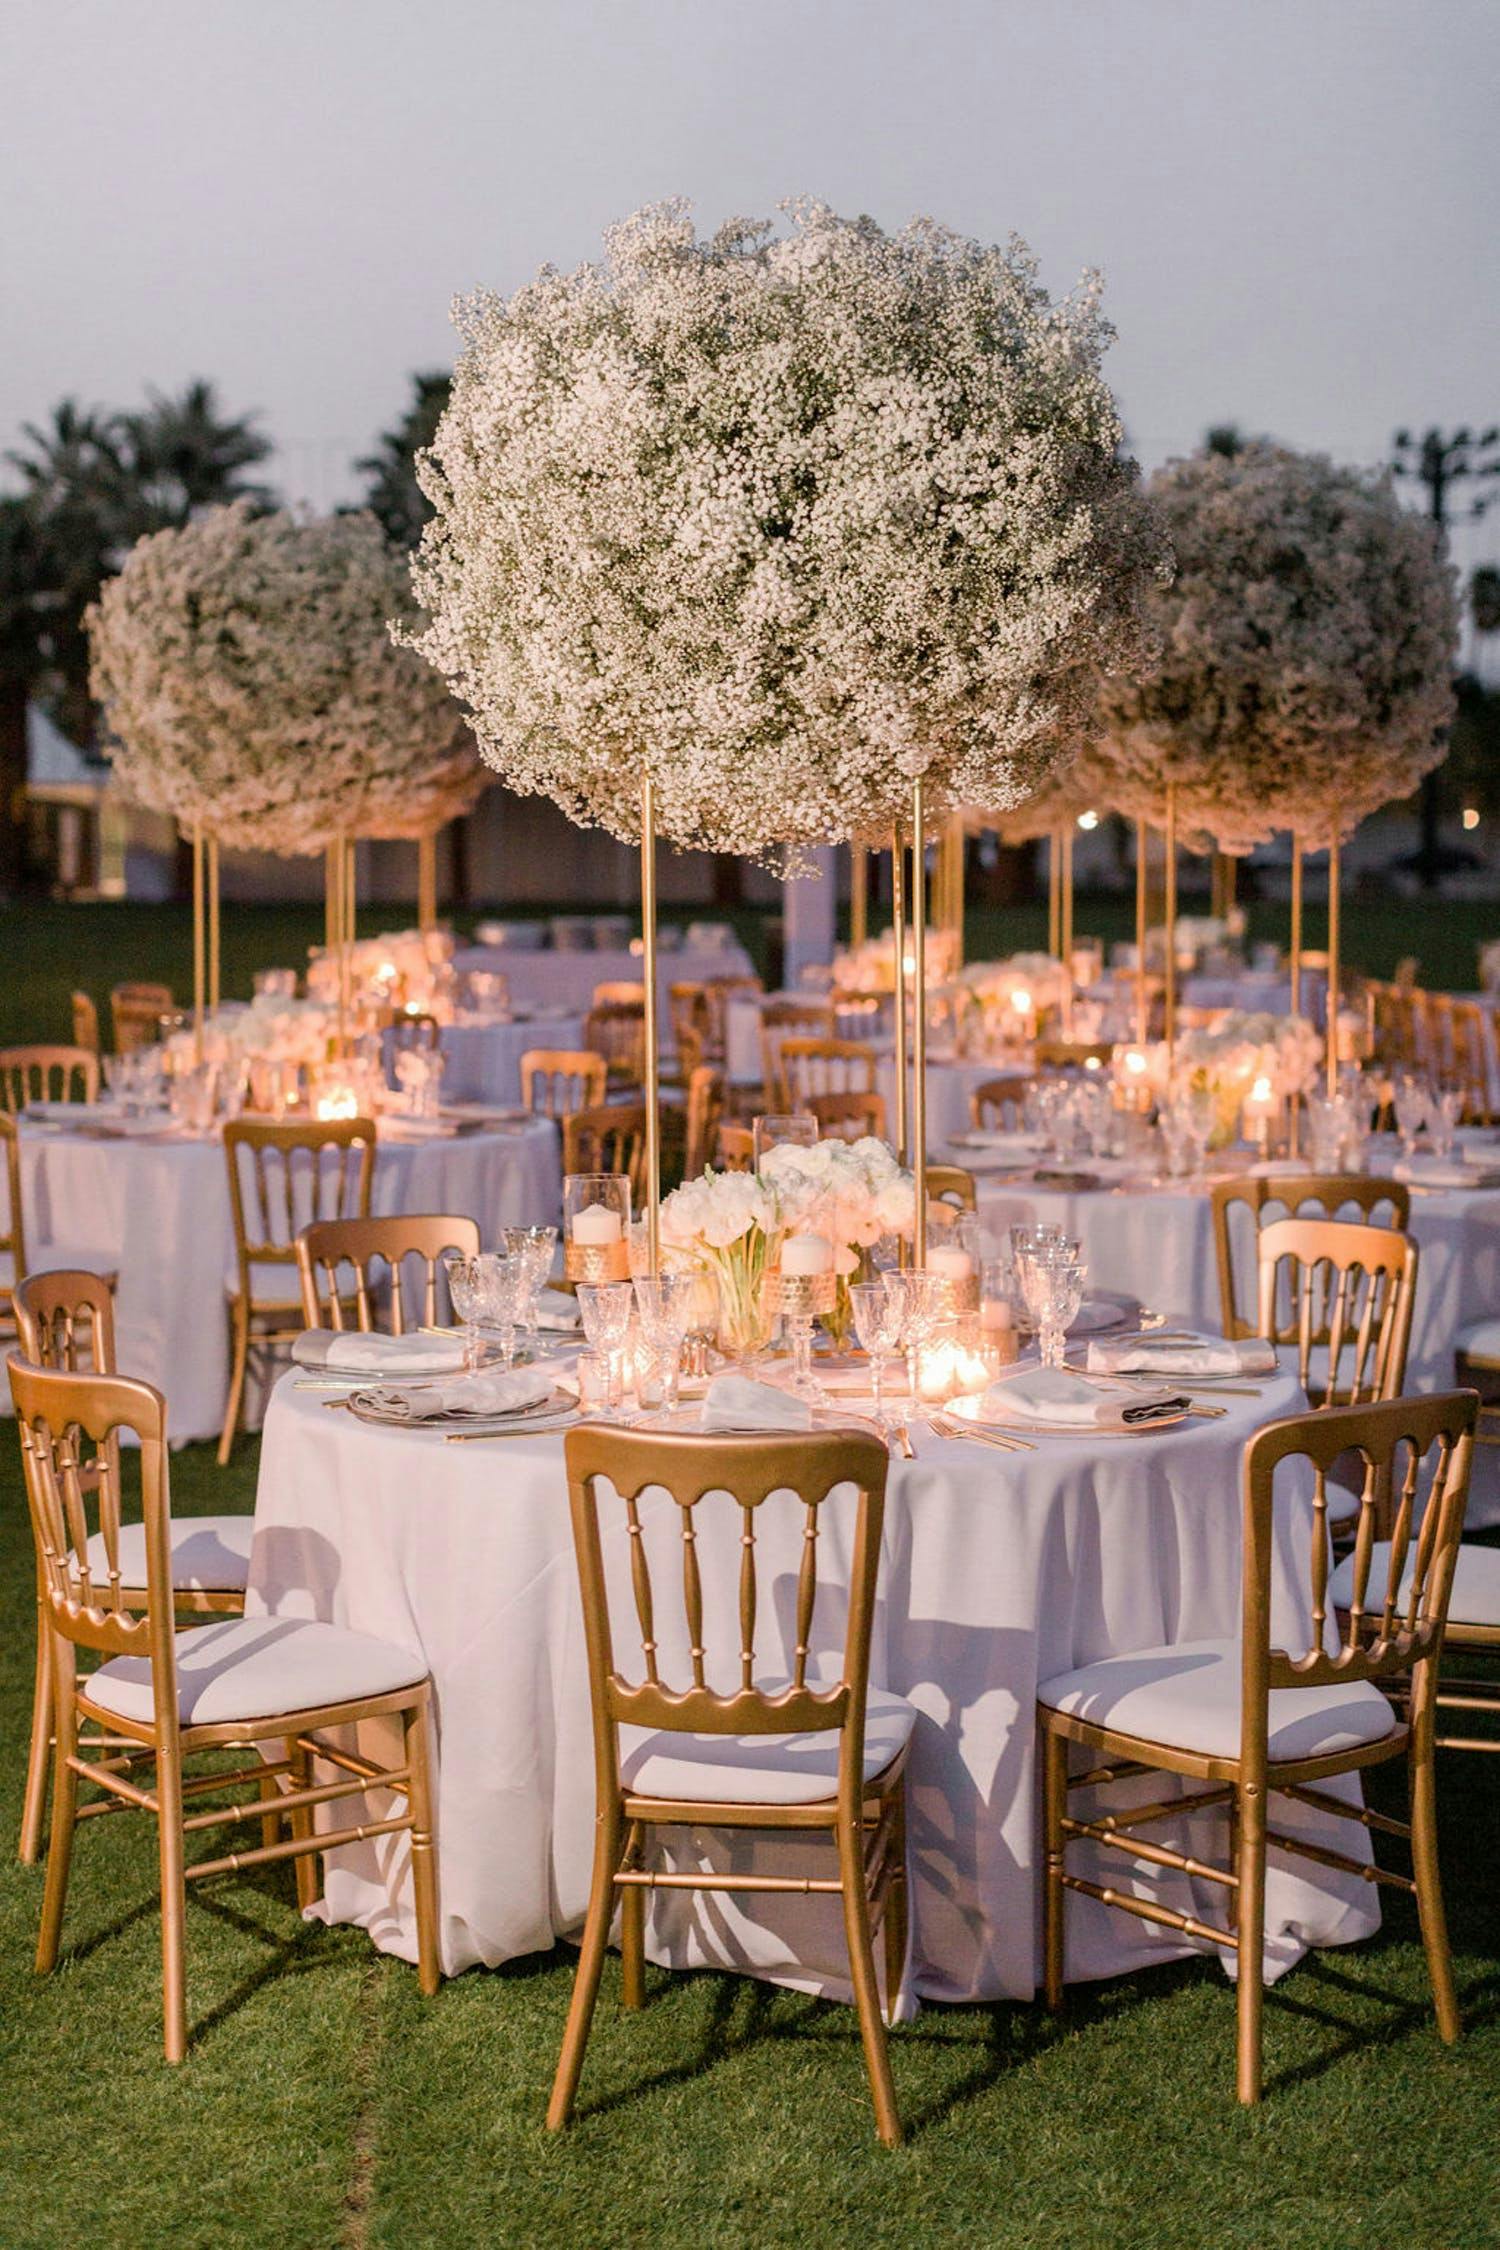 tables with towering baby's breath floral centerpieces